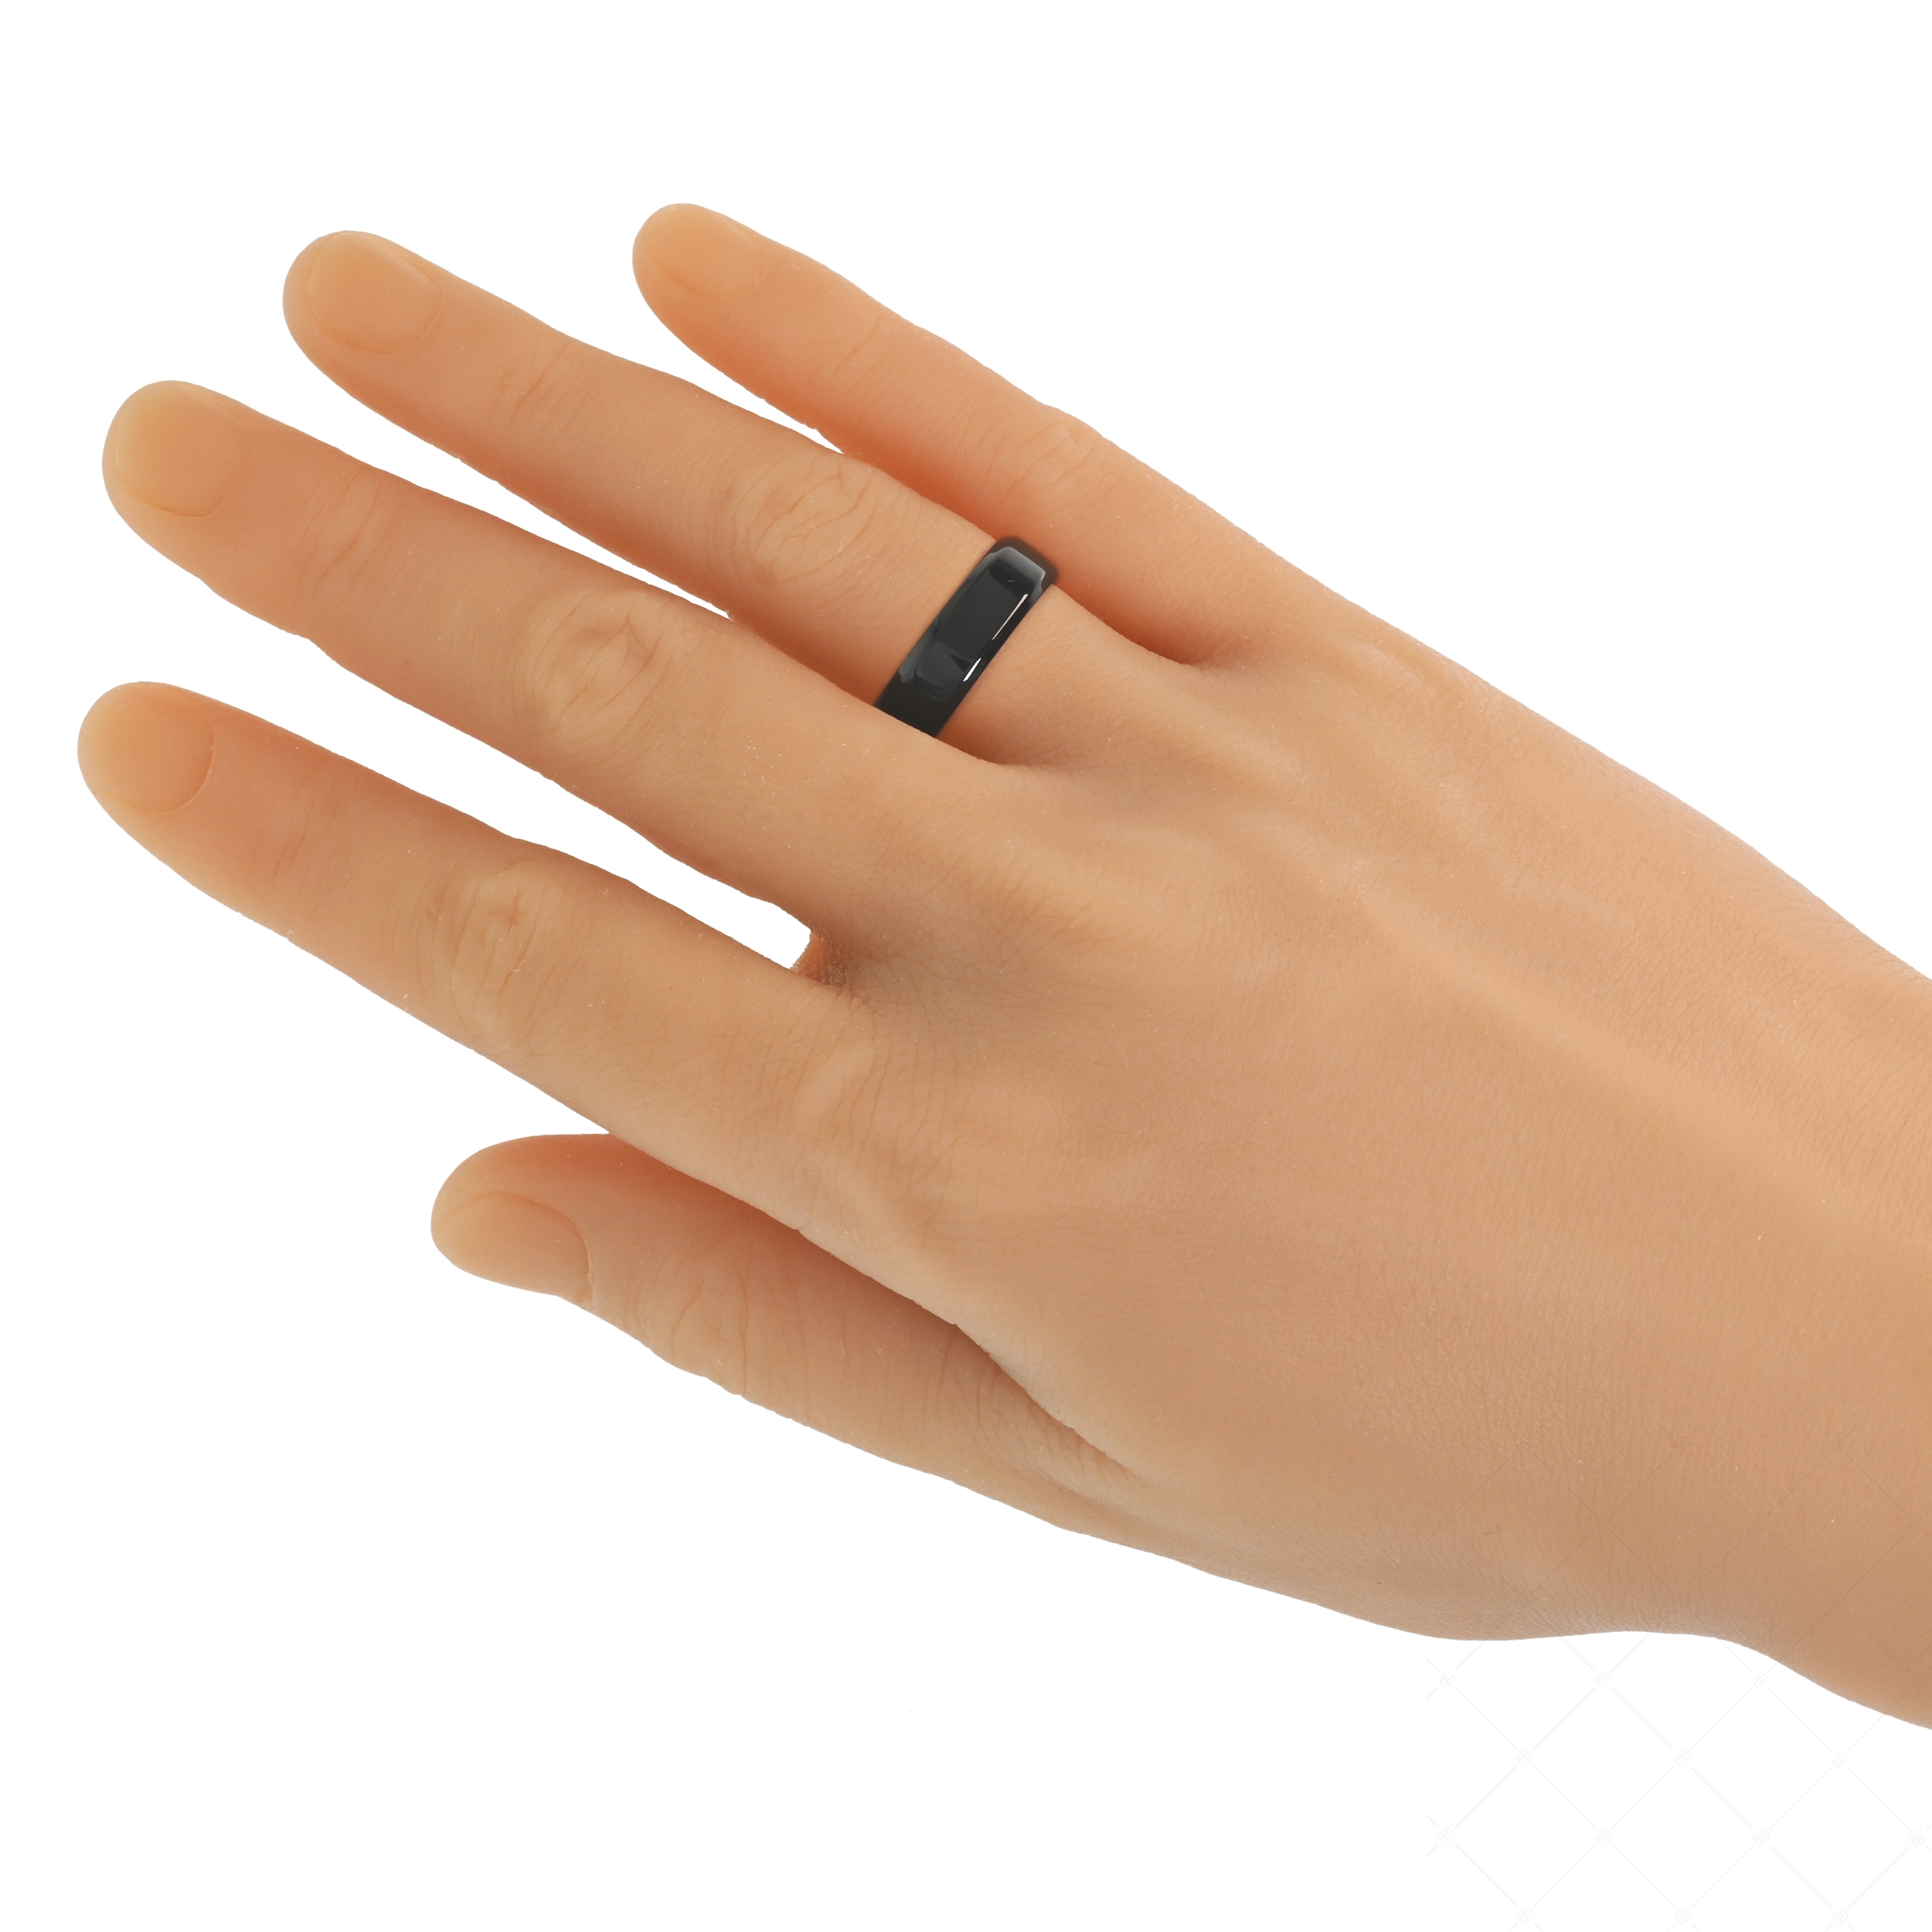 BALCANO - Frankie / Engravable Stainless Steel Ring With Black PVD Plated (042100BL11)